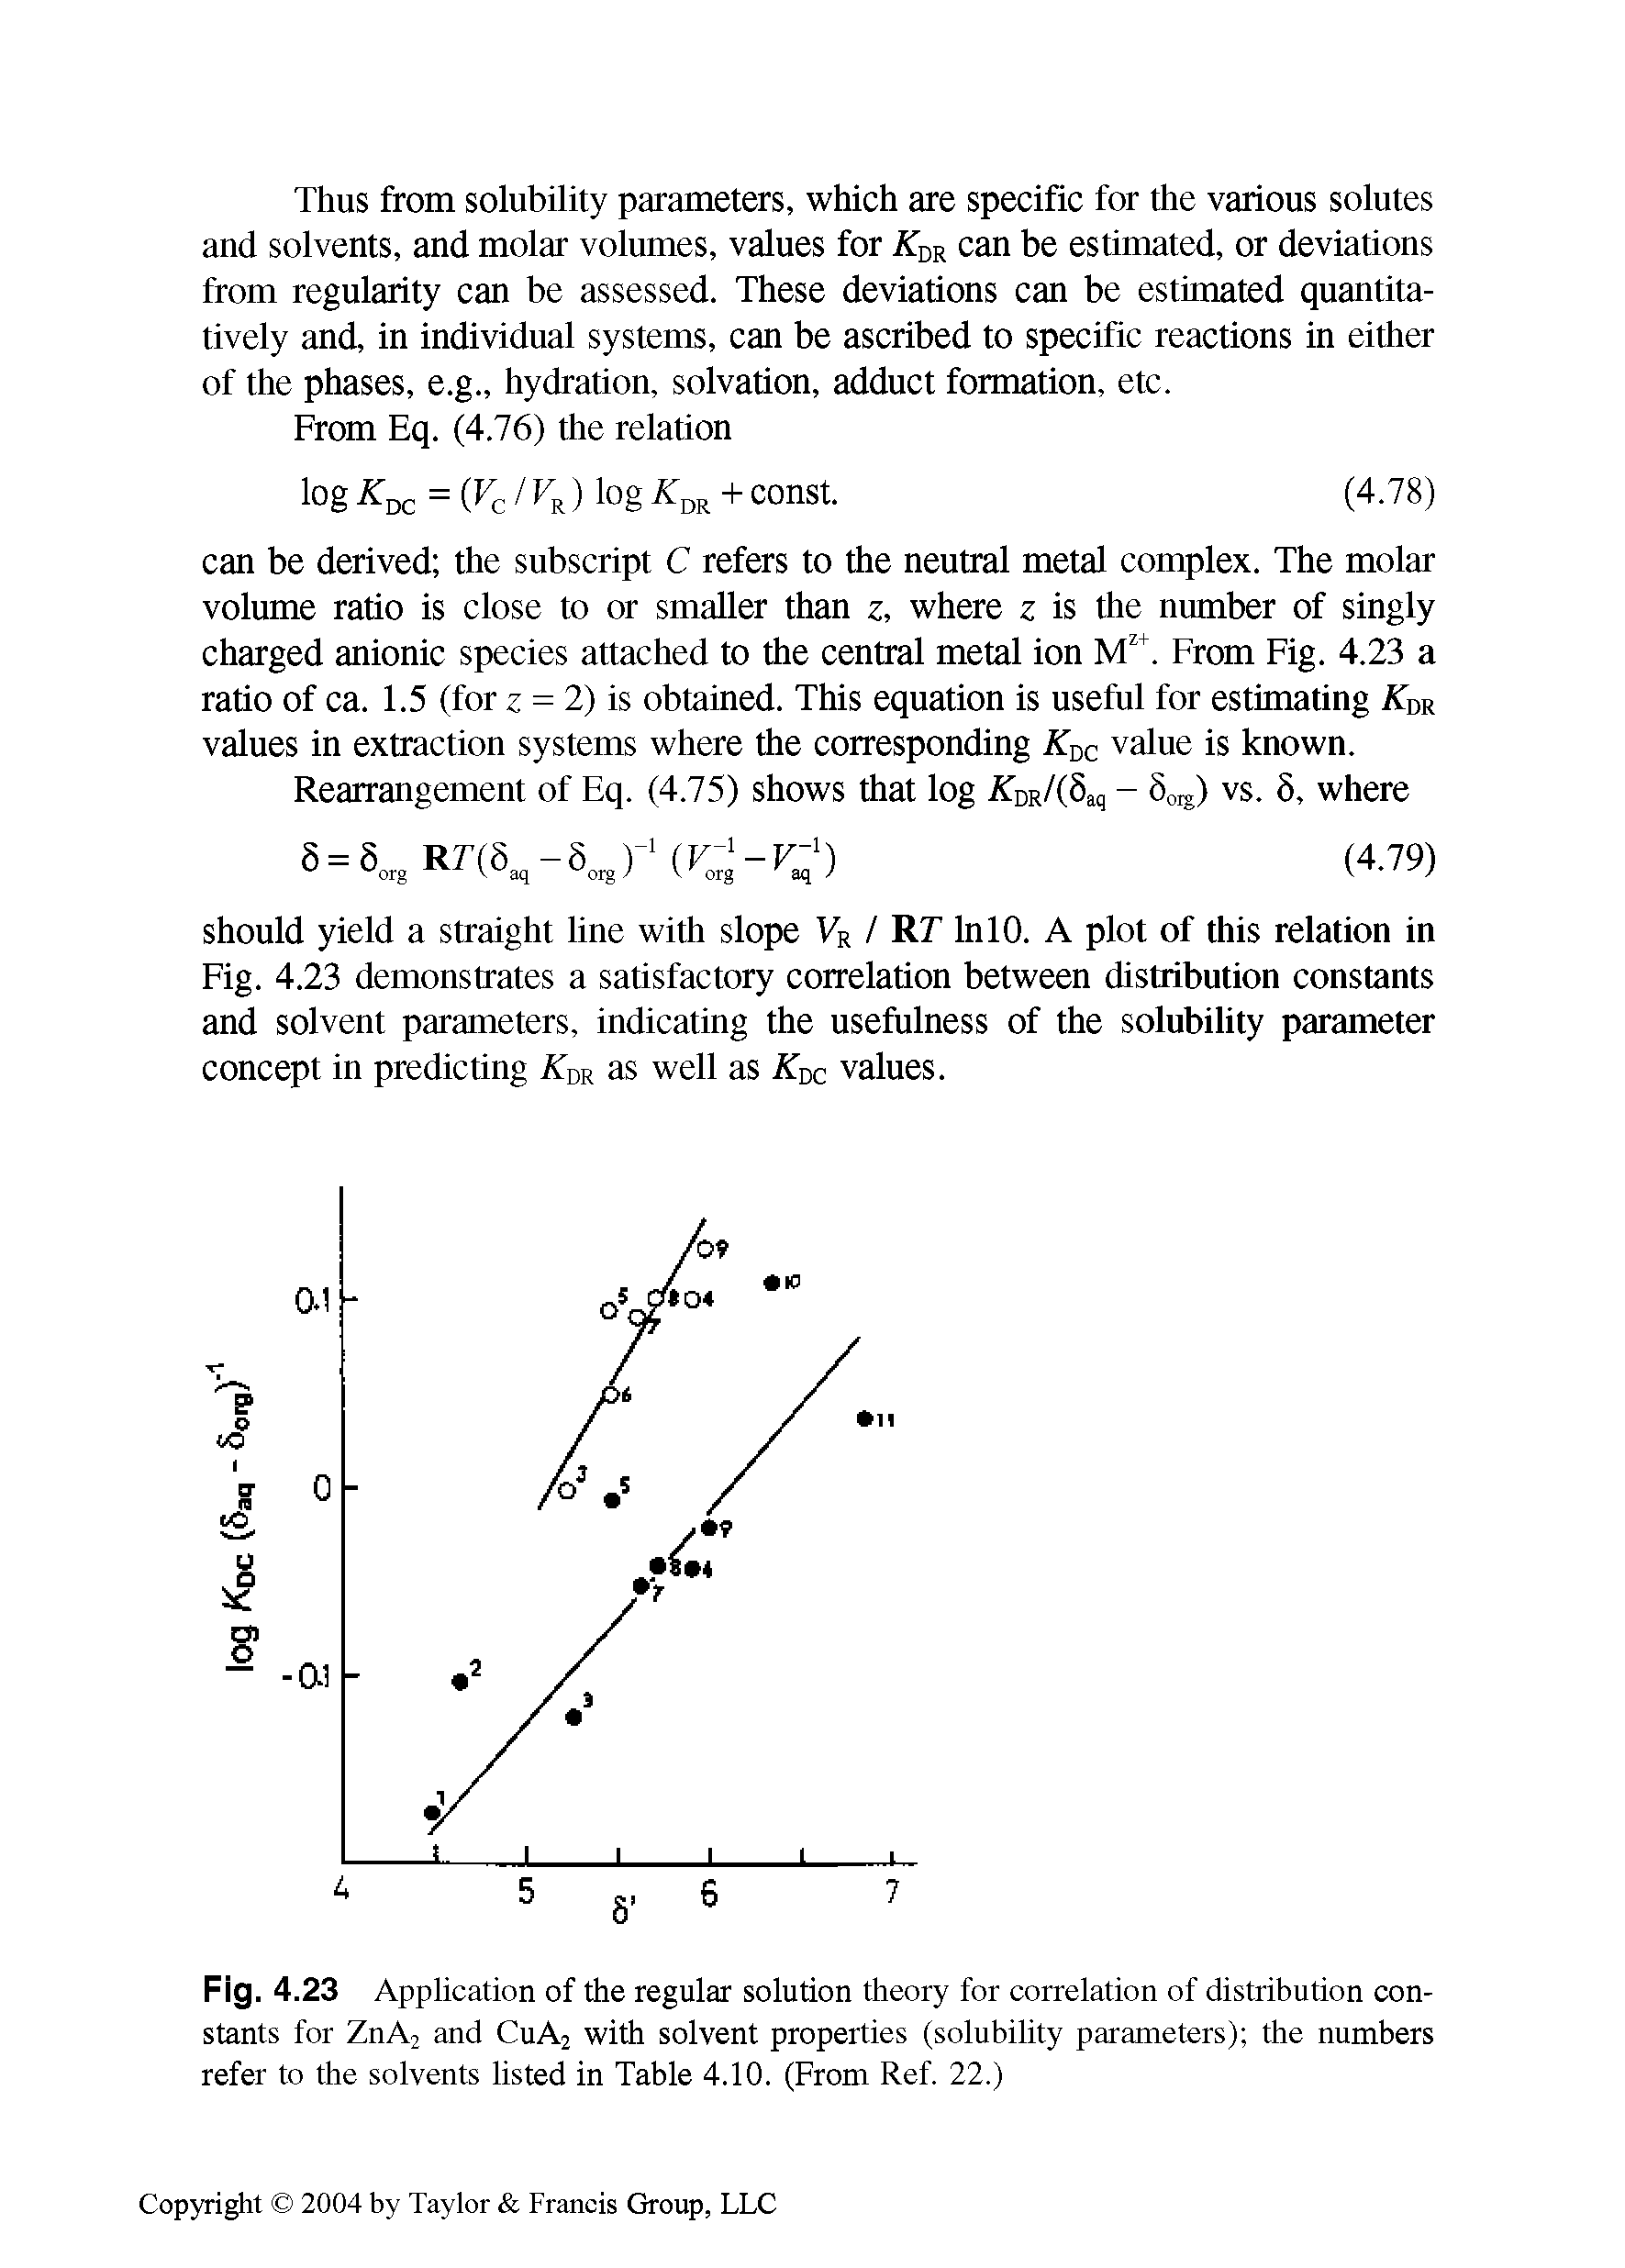 Fig. 4. 23 Application of the regular solution theory for correlation of distribution constants for ZnA2 and CuA2 with solvent properties (solubility parameters) the numbers refer to the solvents listed in Table 4.10. (From Ref. 22.)...